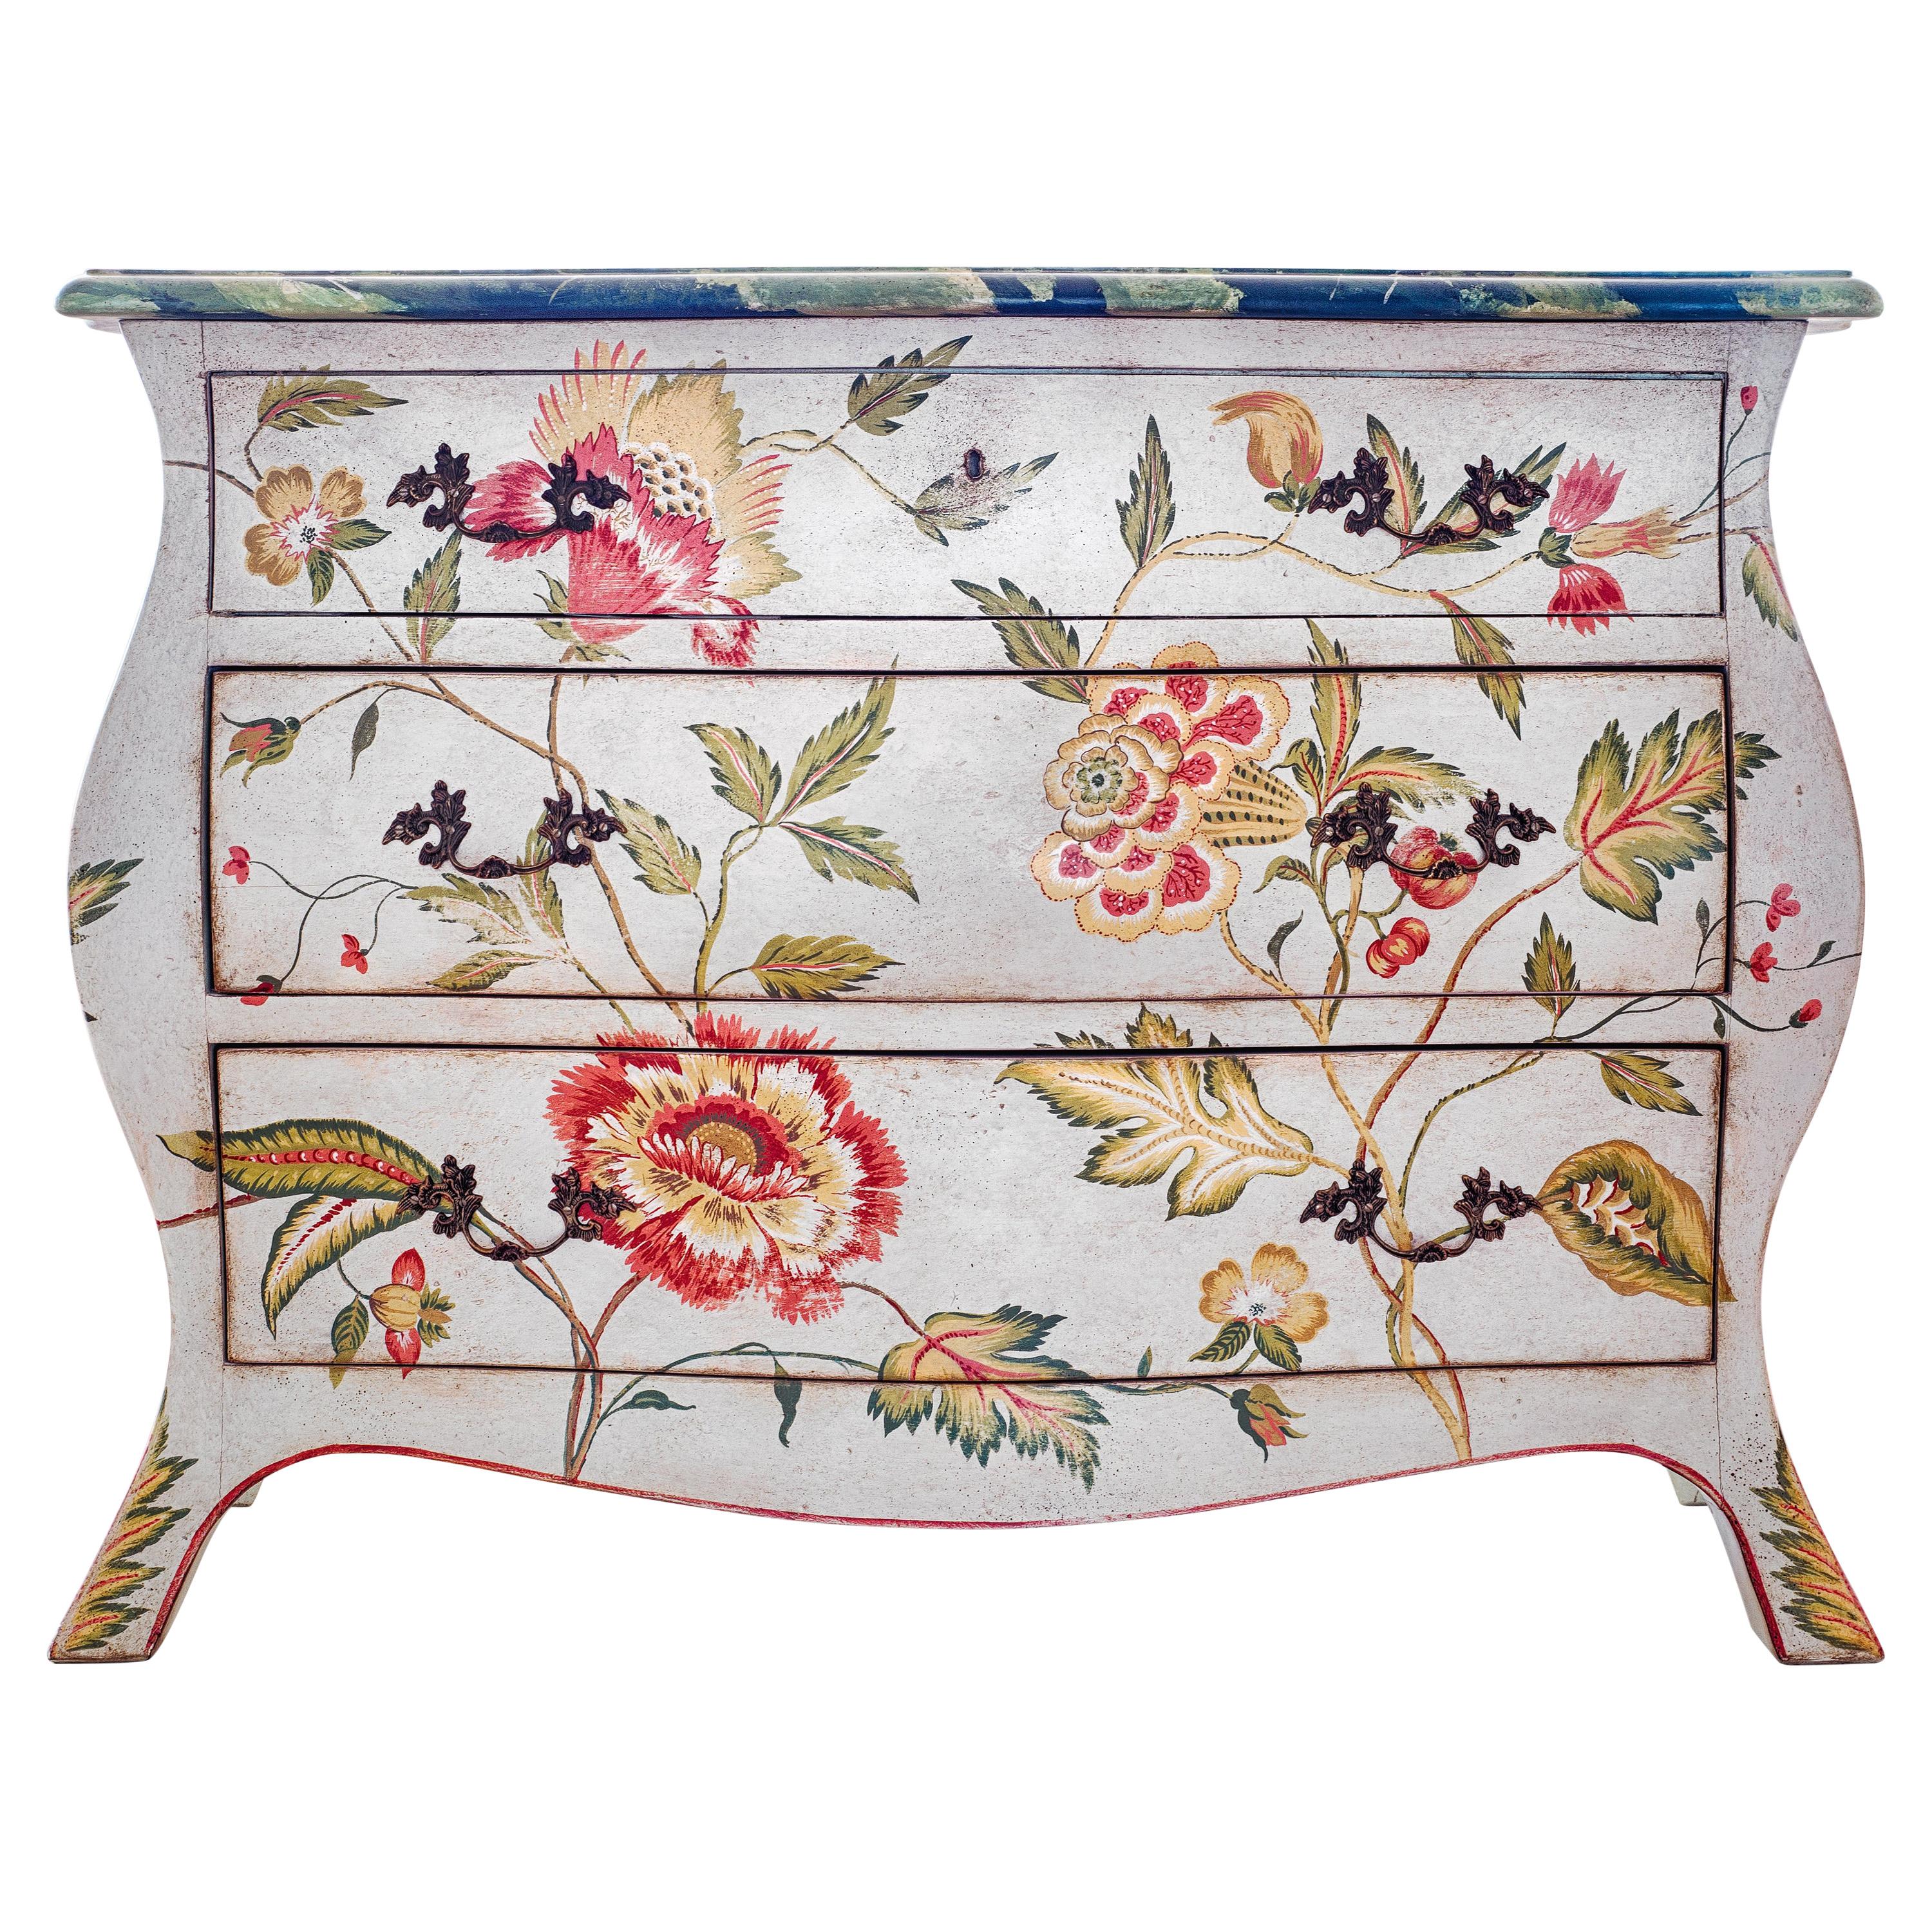 18th Century Hand-Painted Venetian Style Asolo Chest in Jacobean Inspired Decors